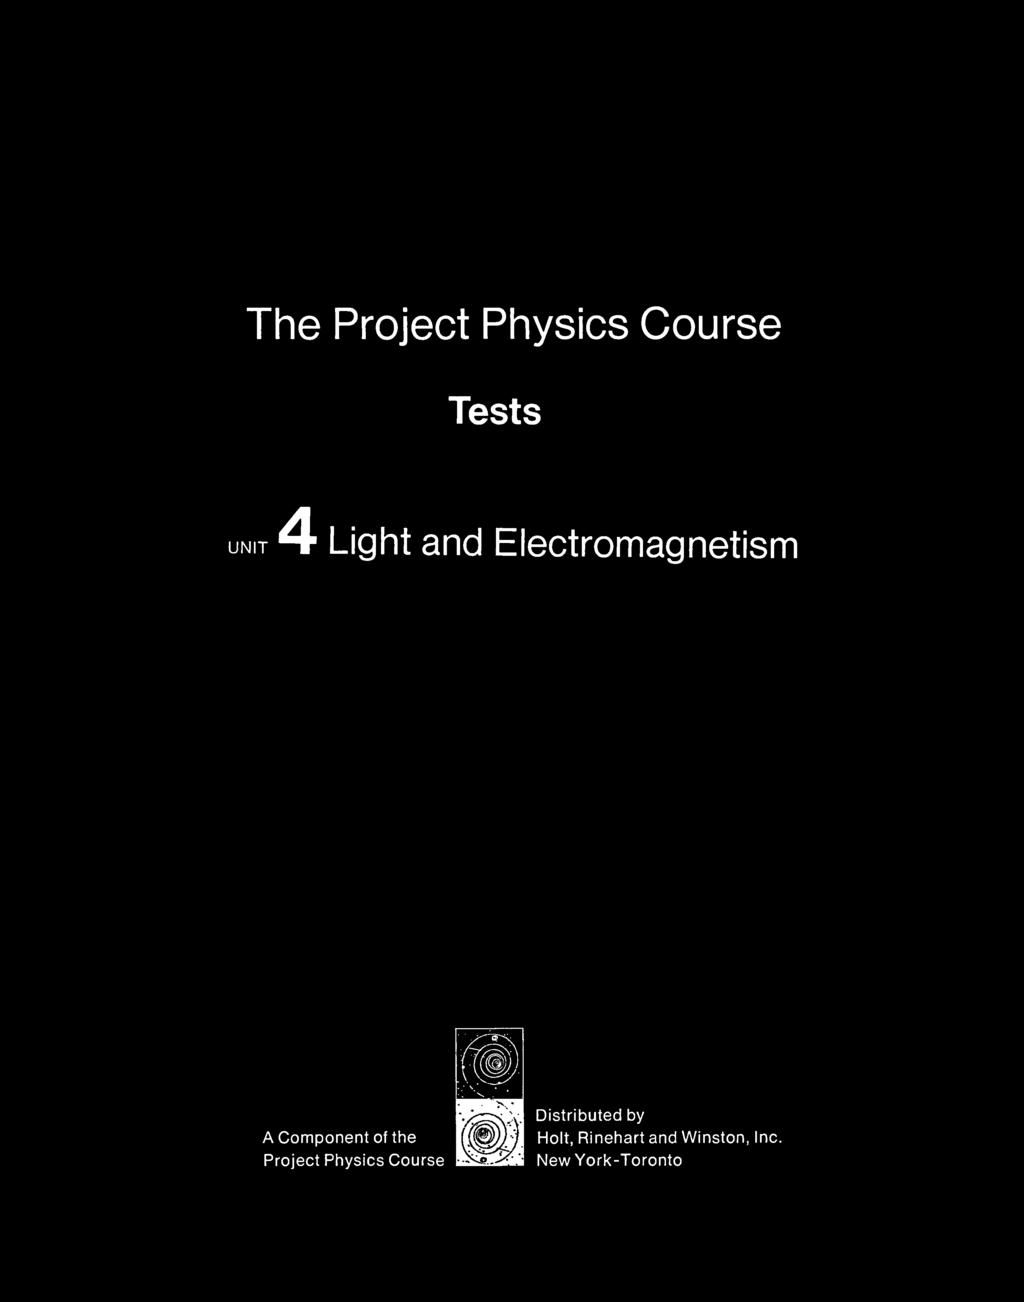 Component of the Project Physics Course